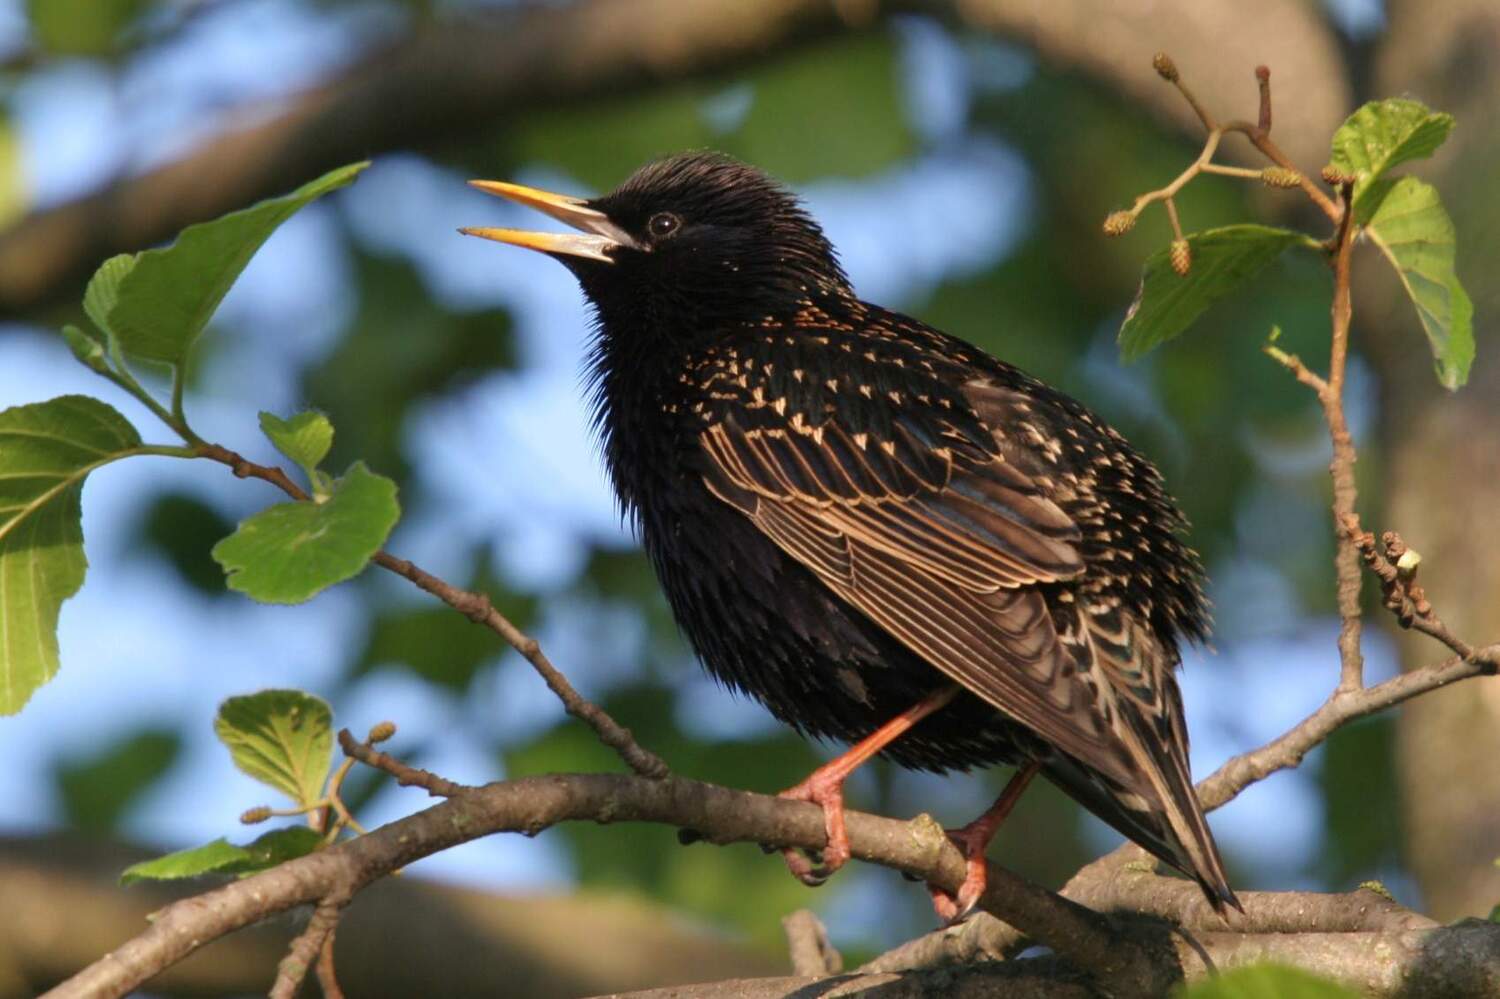 Starlings have vanished from many gardens in Central Europe, and with them their whistling and twittering songs enriched with skilful imitations